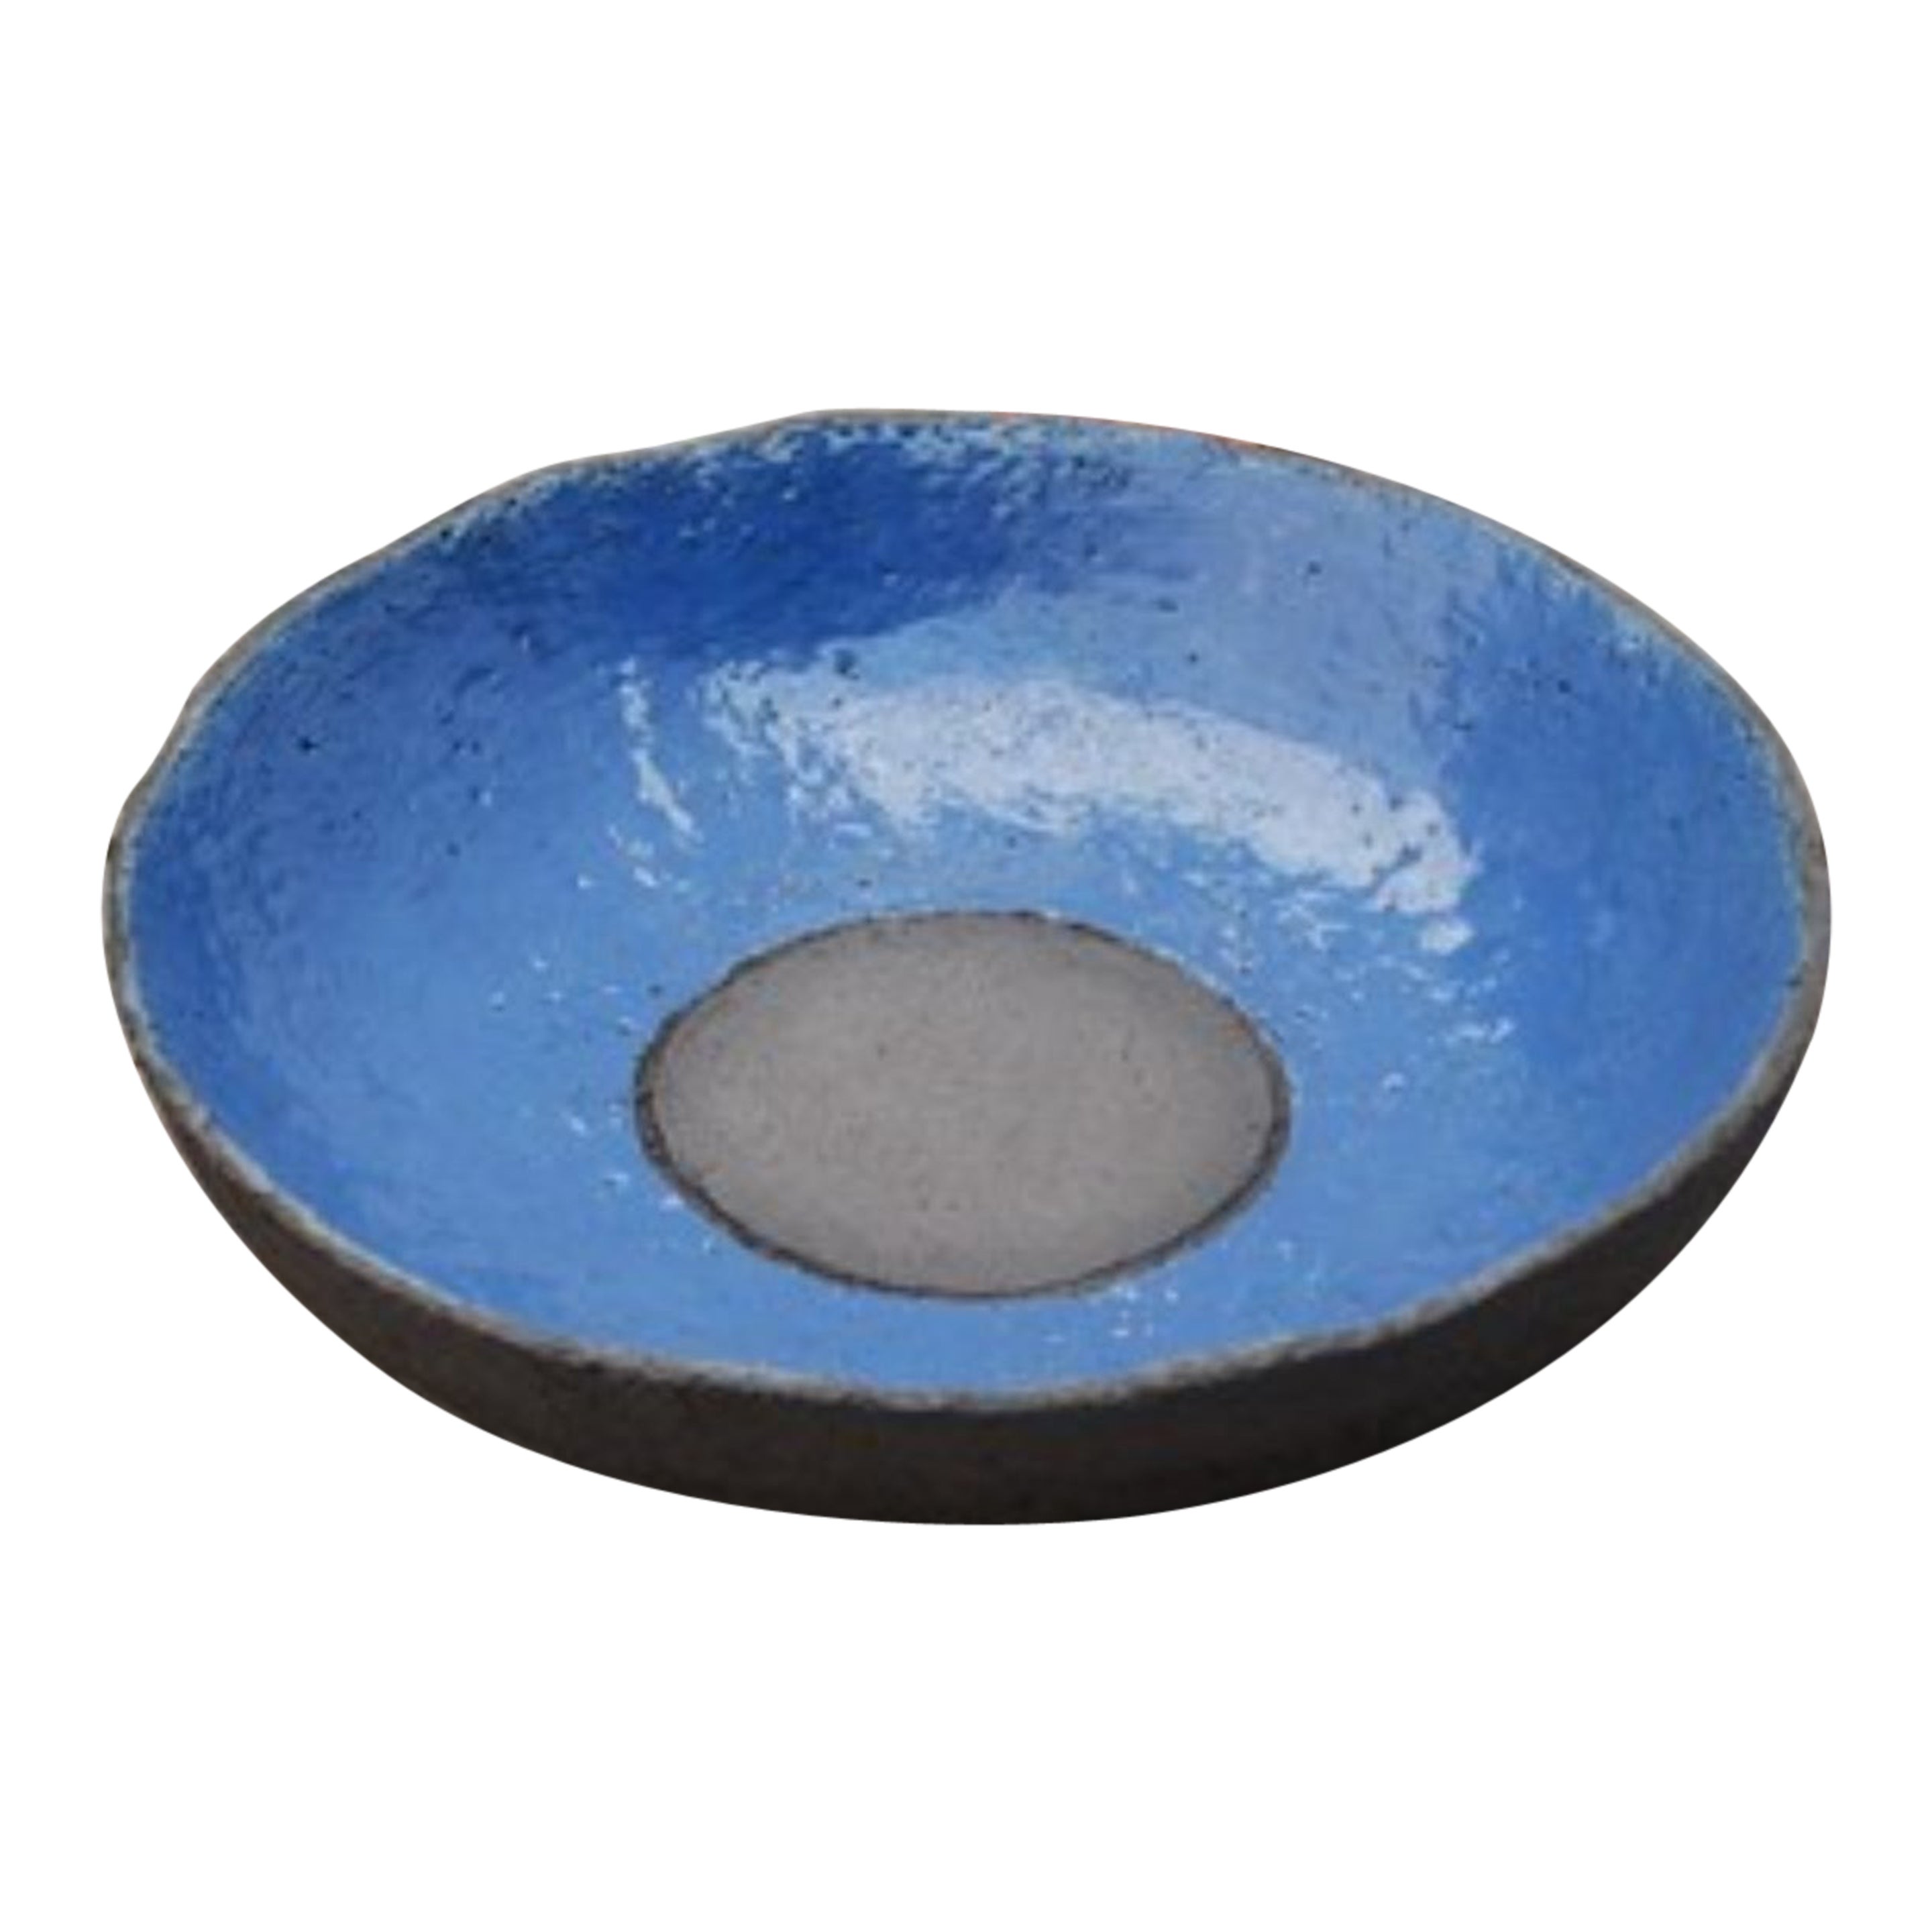 Small, Low Bowl by Atelier Ledure For Sale